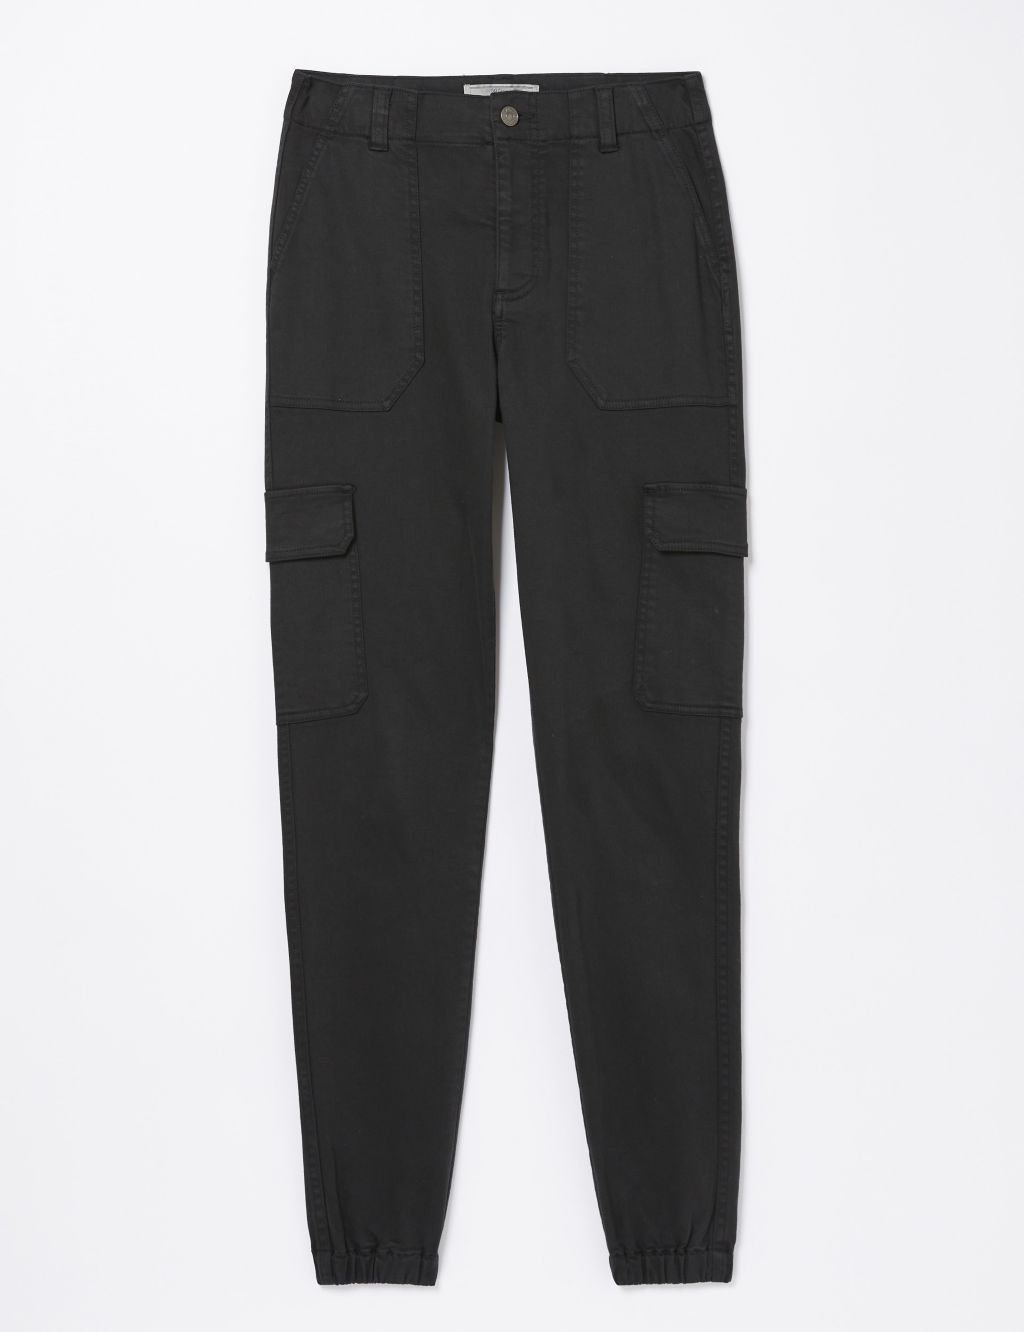 Cotton Rich Cargo Cuffed Trousers image 2